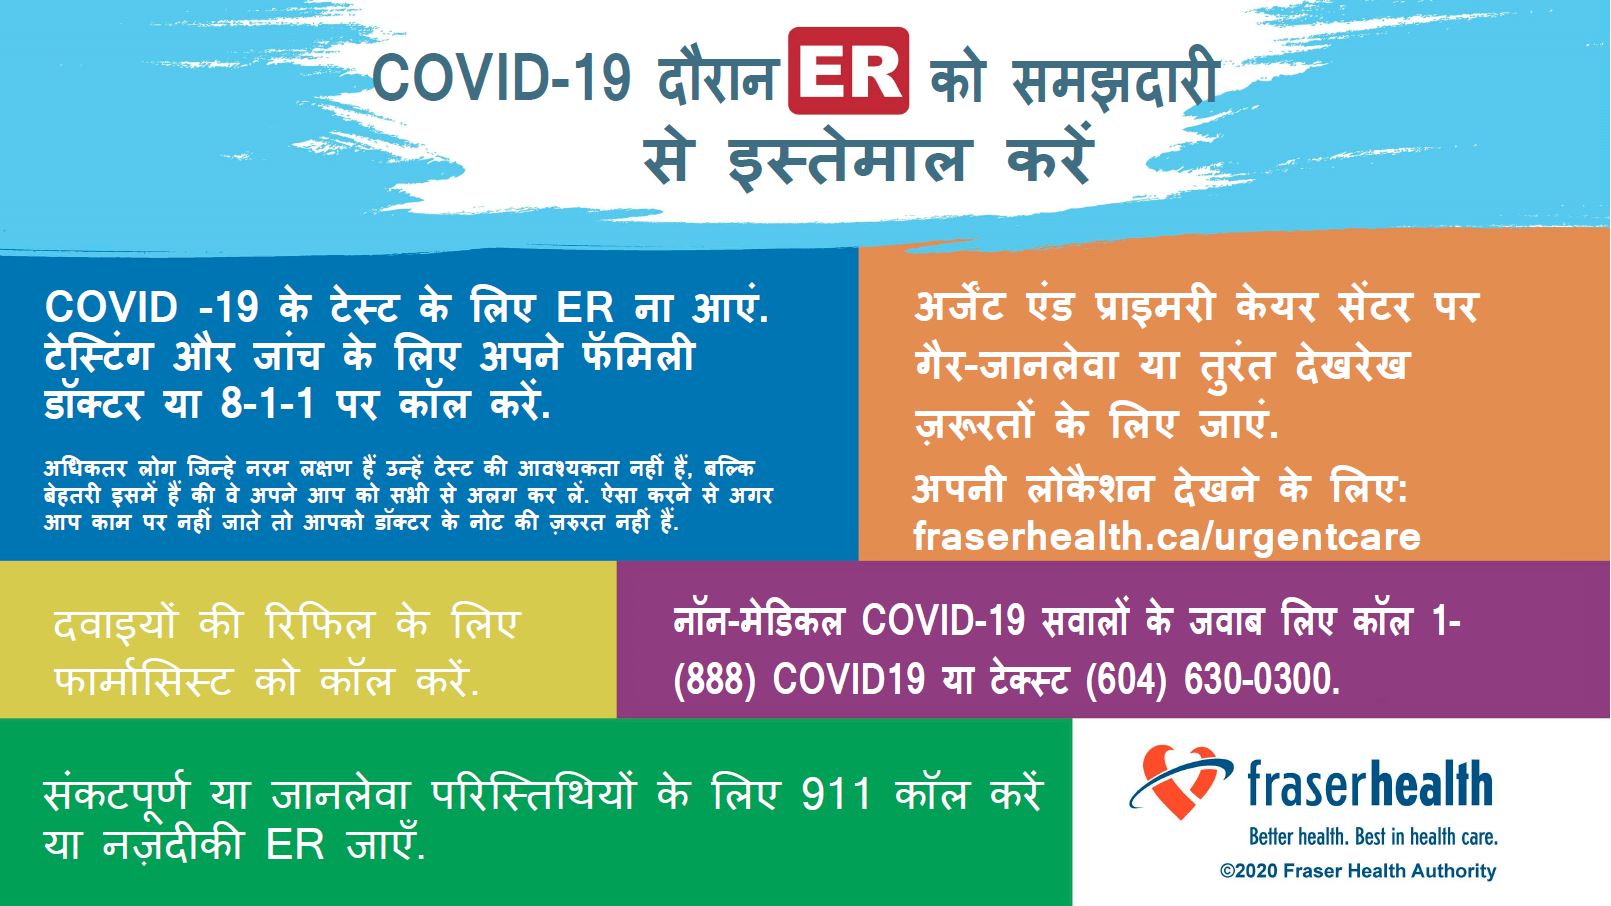 Use the ER wesley during COVID-19 infographic in Hindi